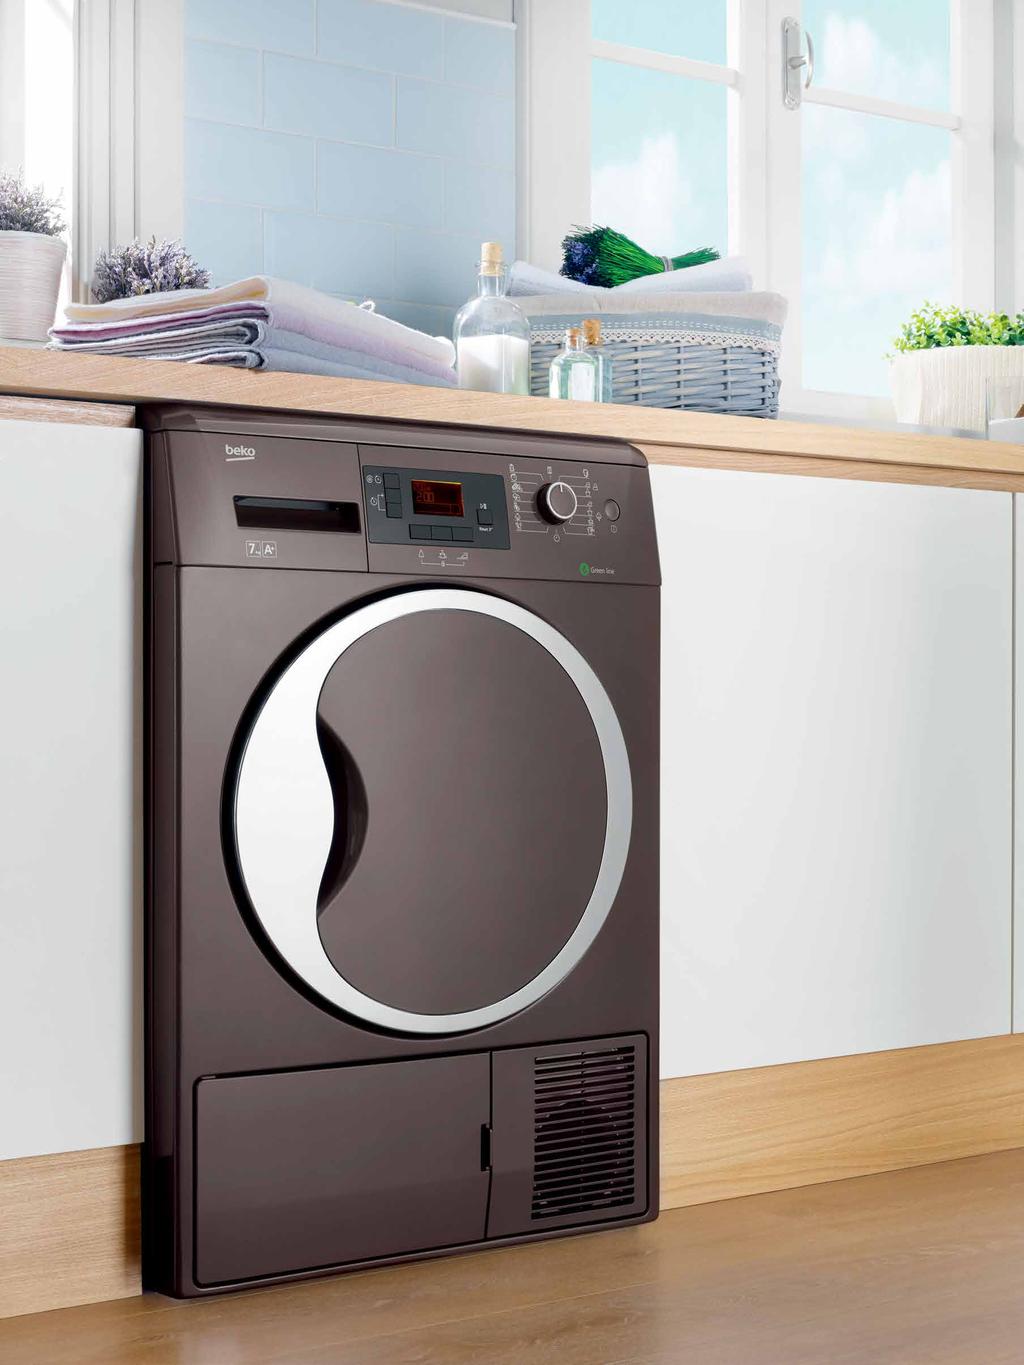 Freestanding Catalogue Tumble Dryers Tumble Dryers Beko Tumble Dryers are the ideal partner for your washing machine.